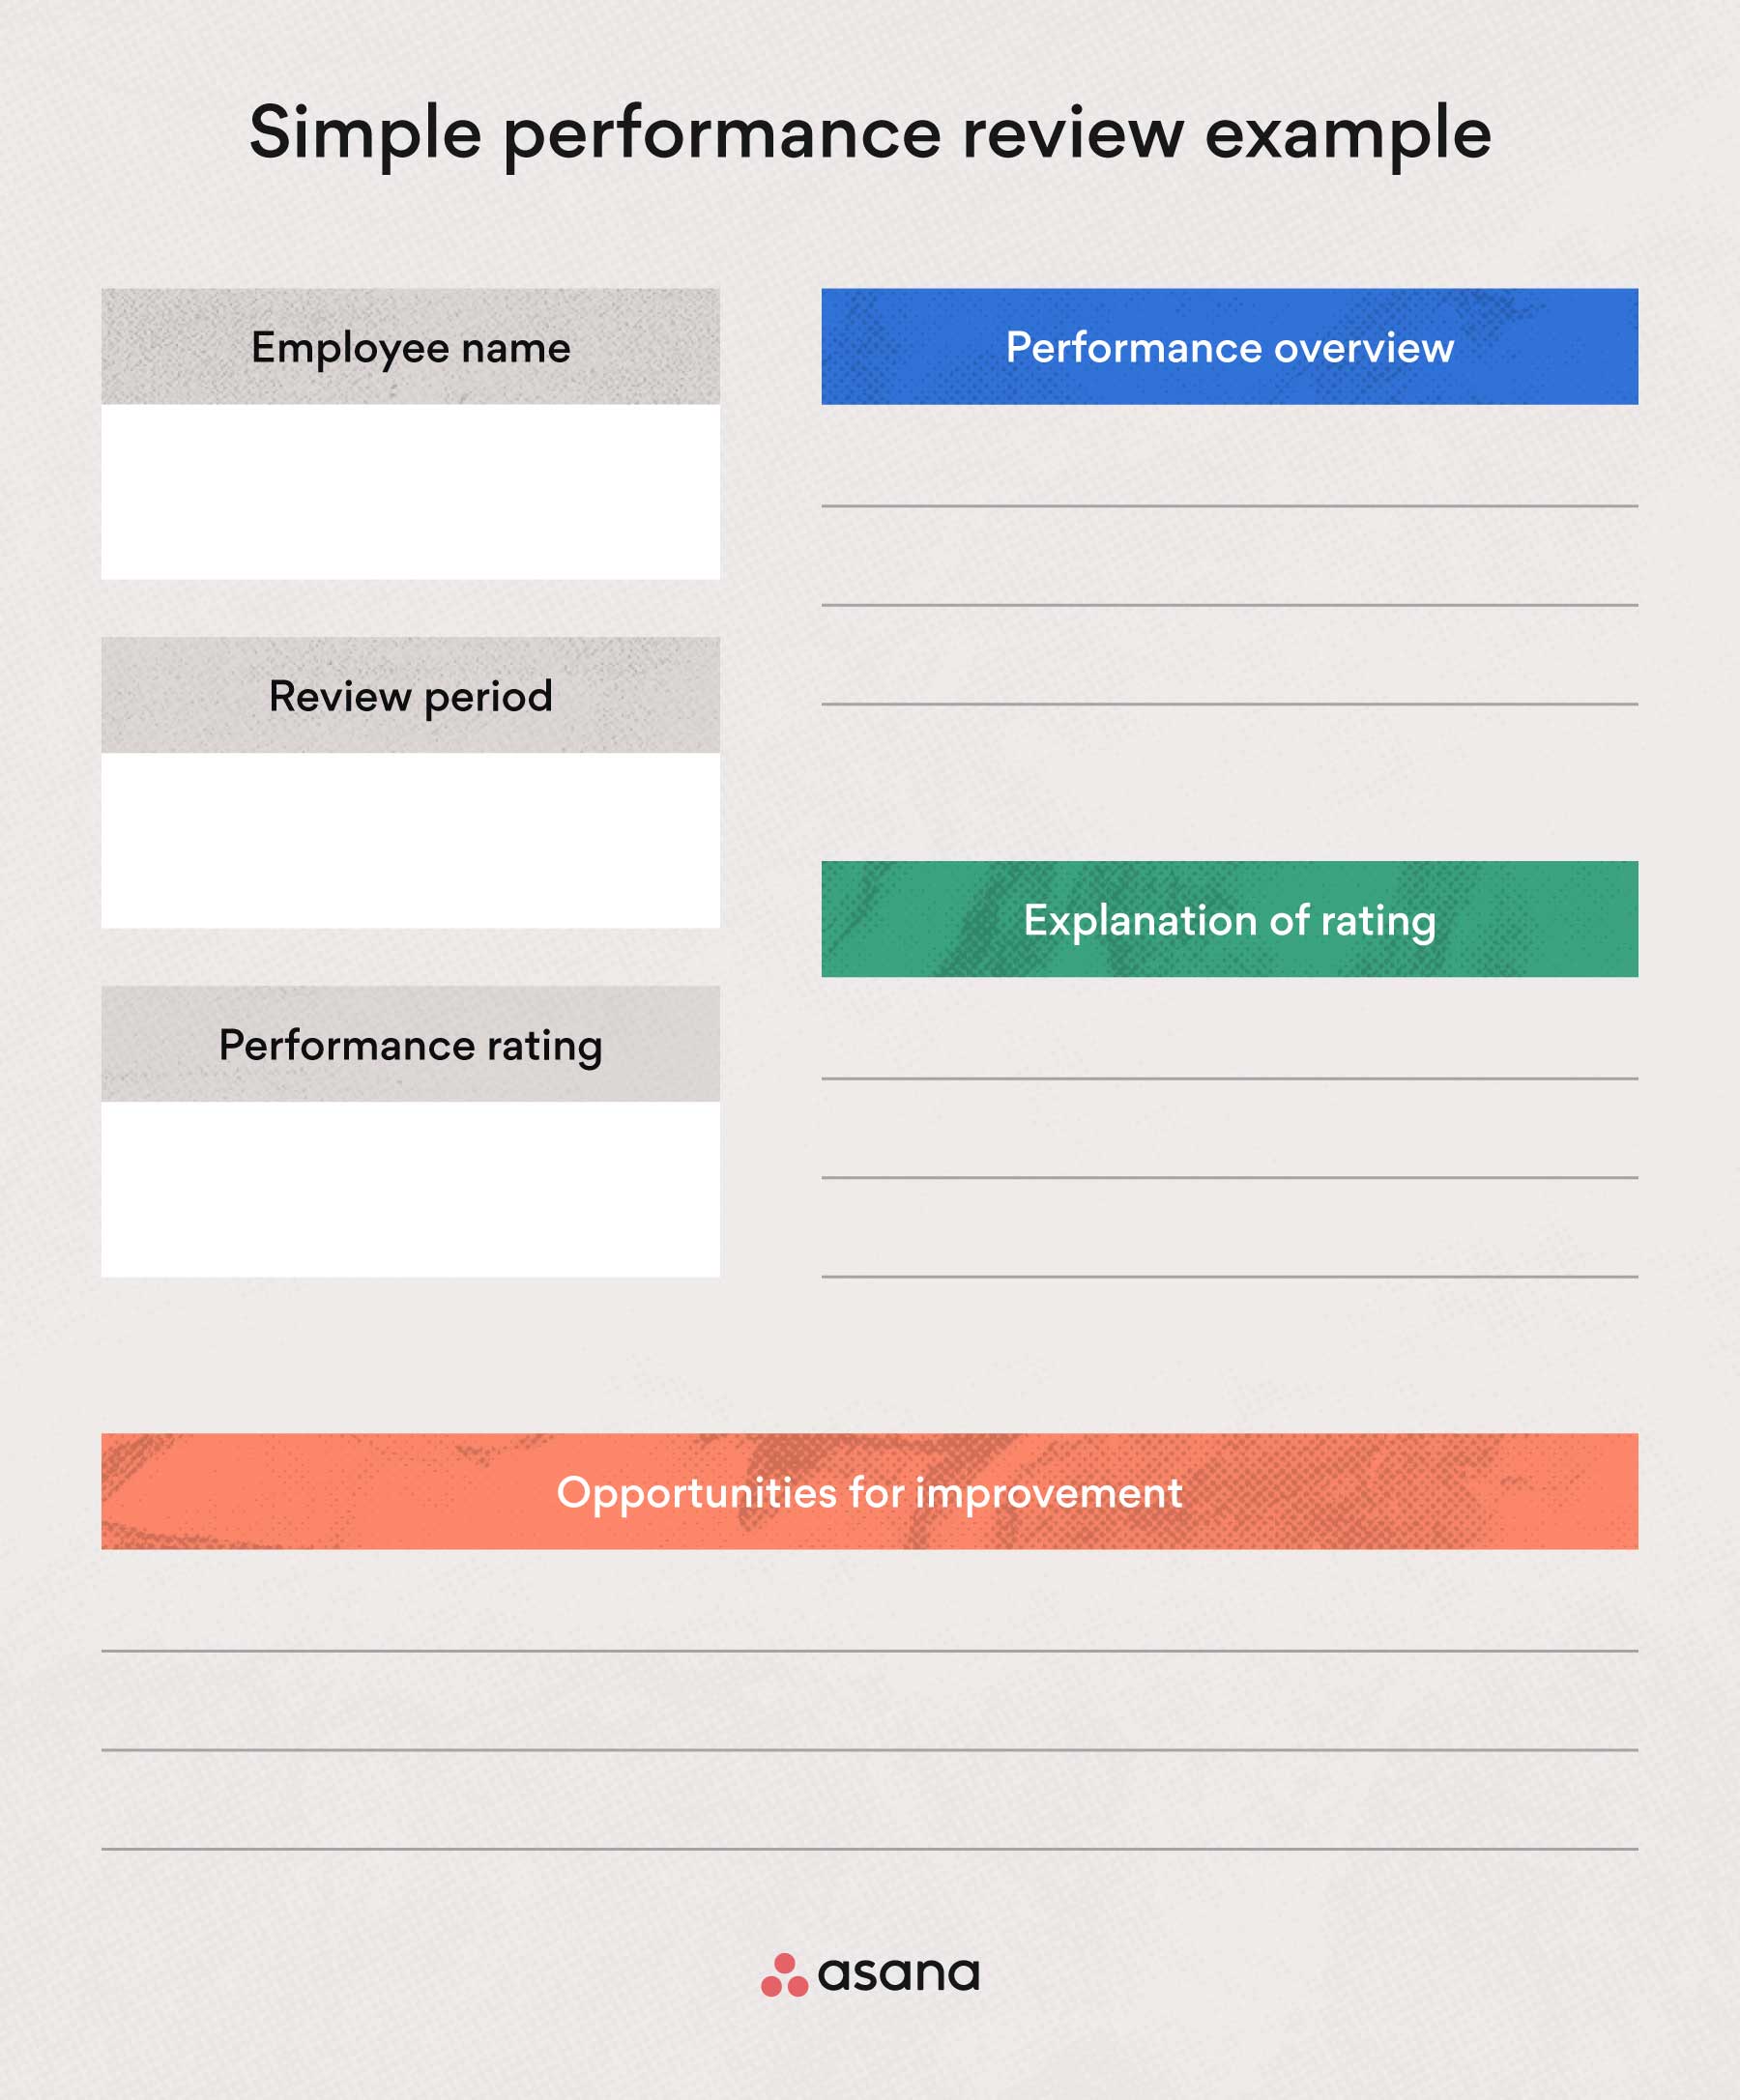 Simple performance review